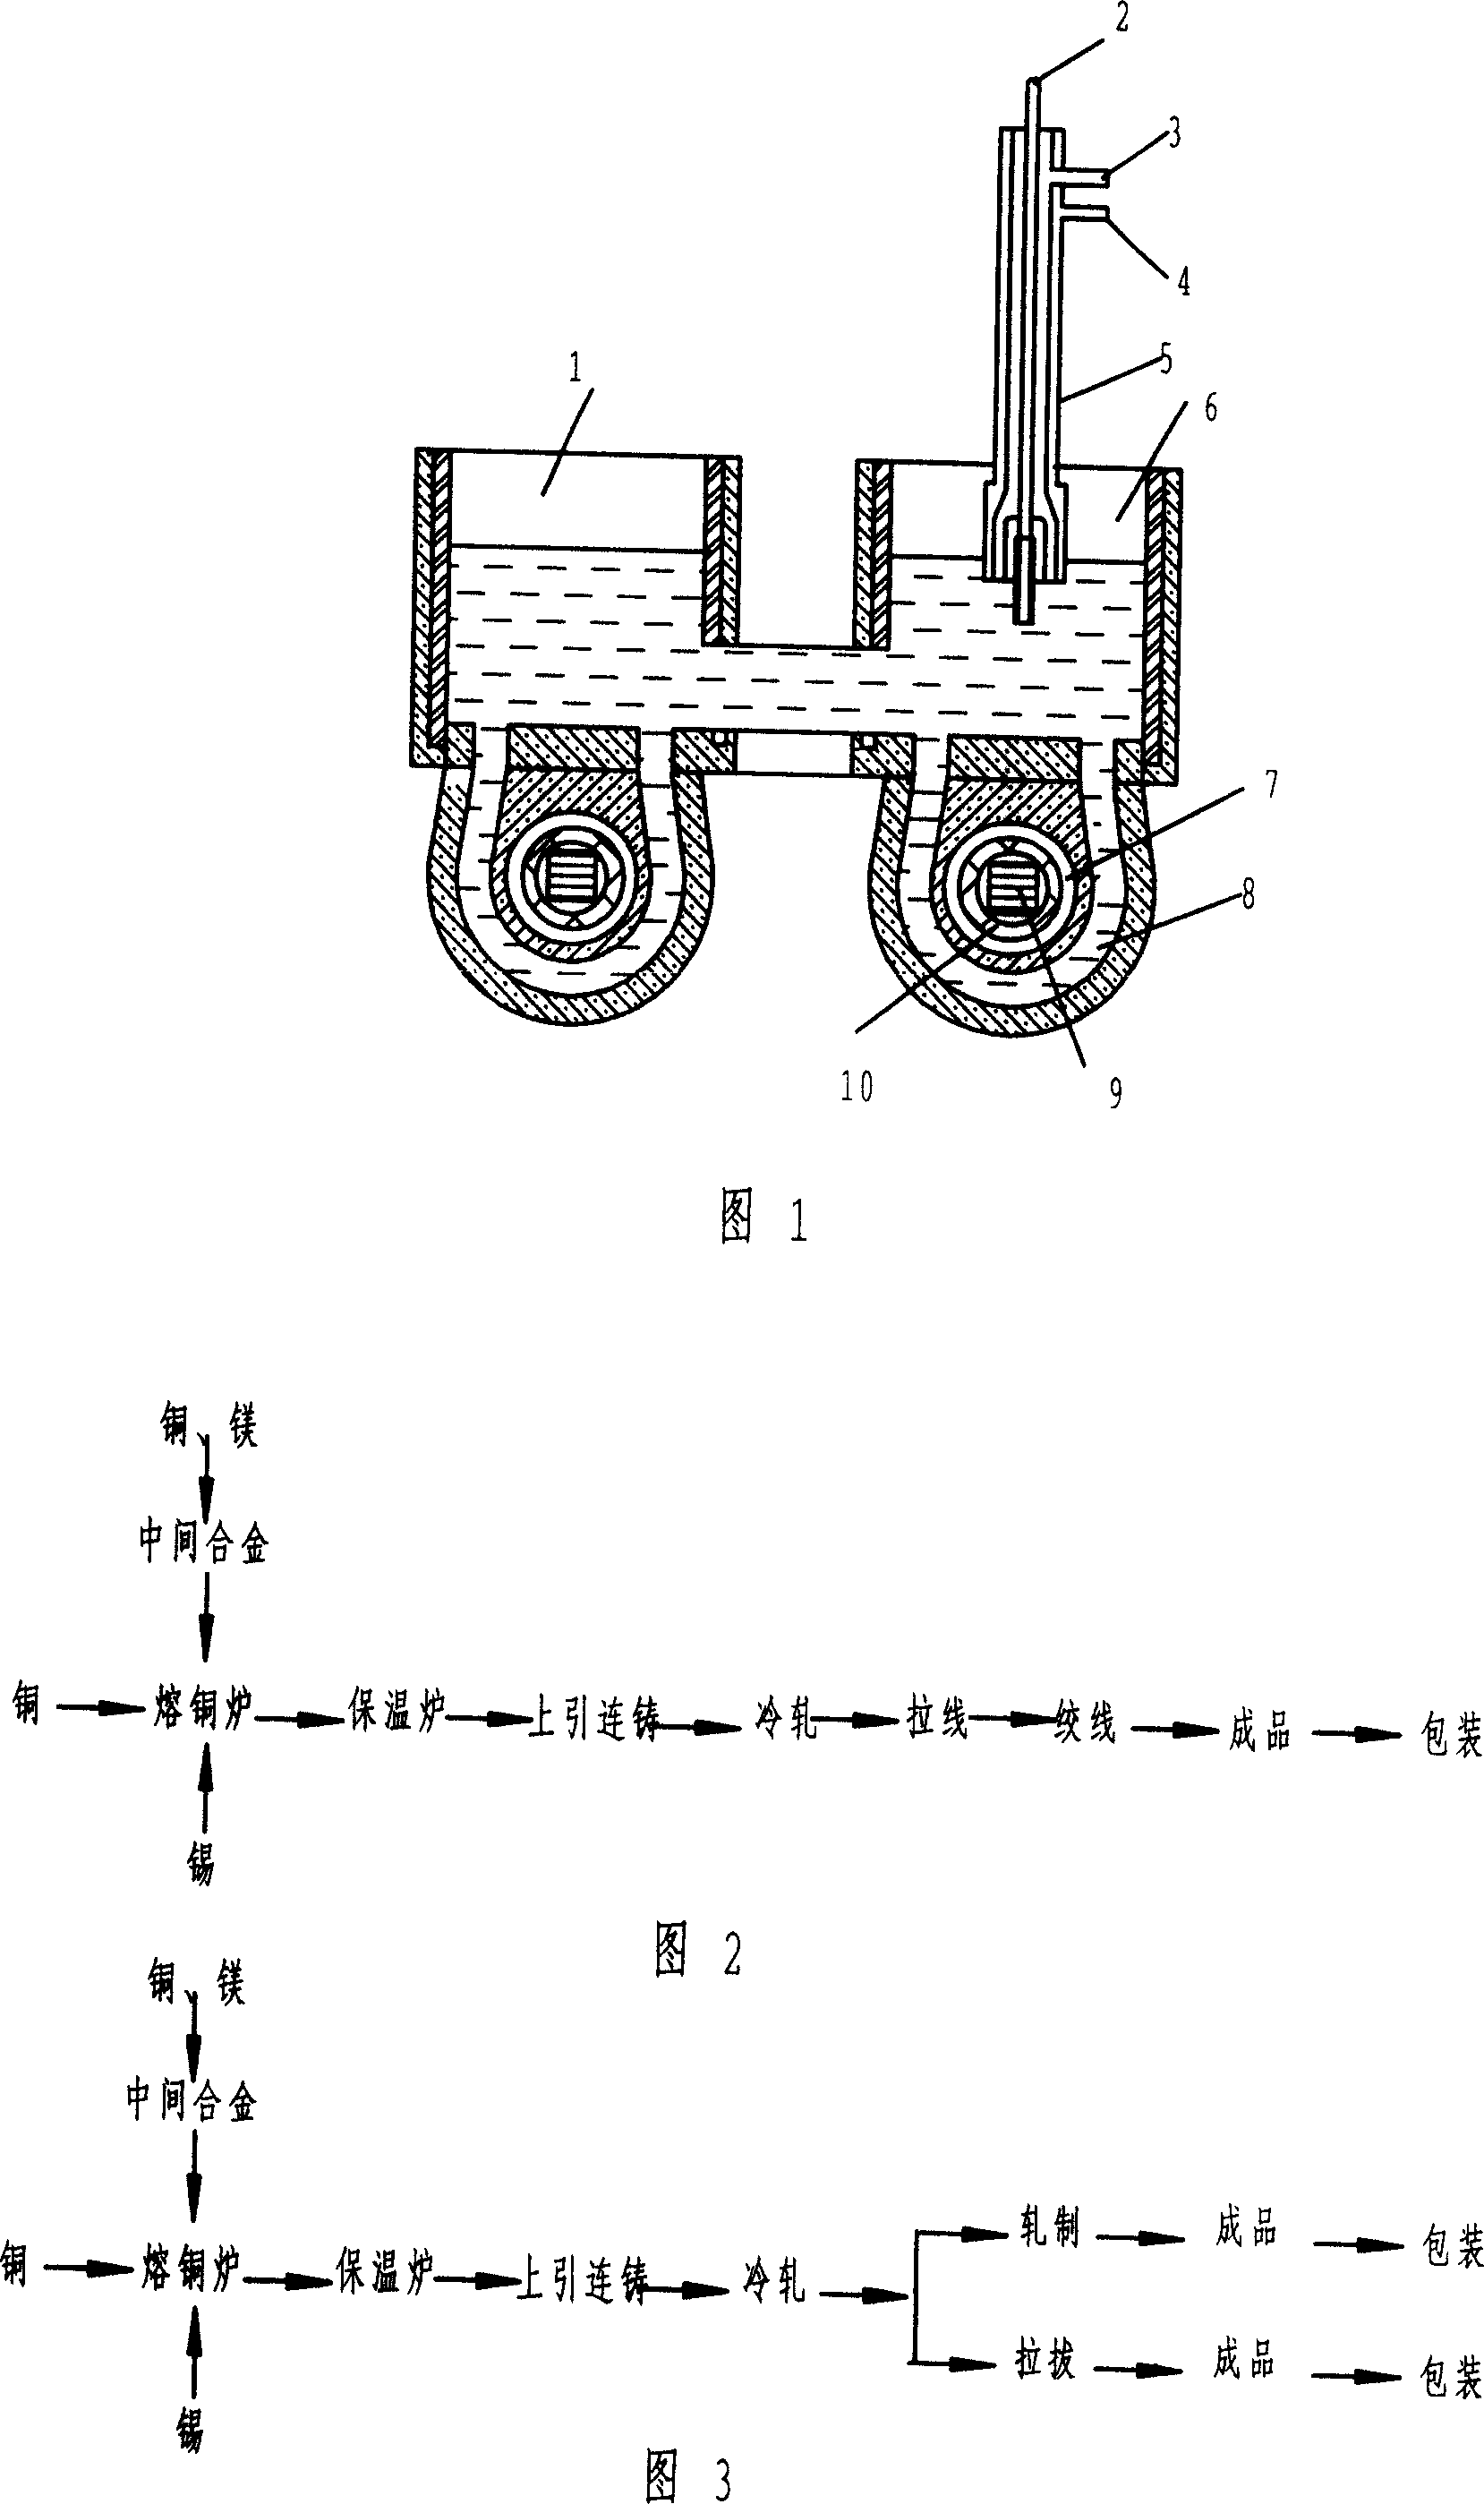 Ternary copper-alloy stranded conductor and contact line preparing method